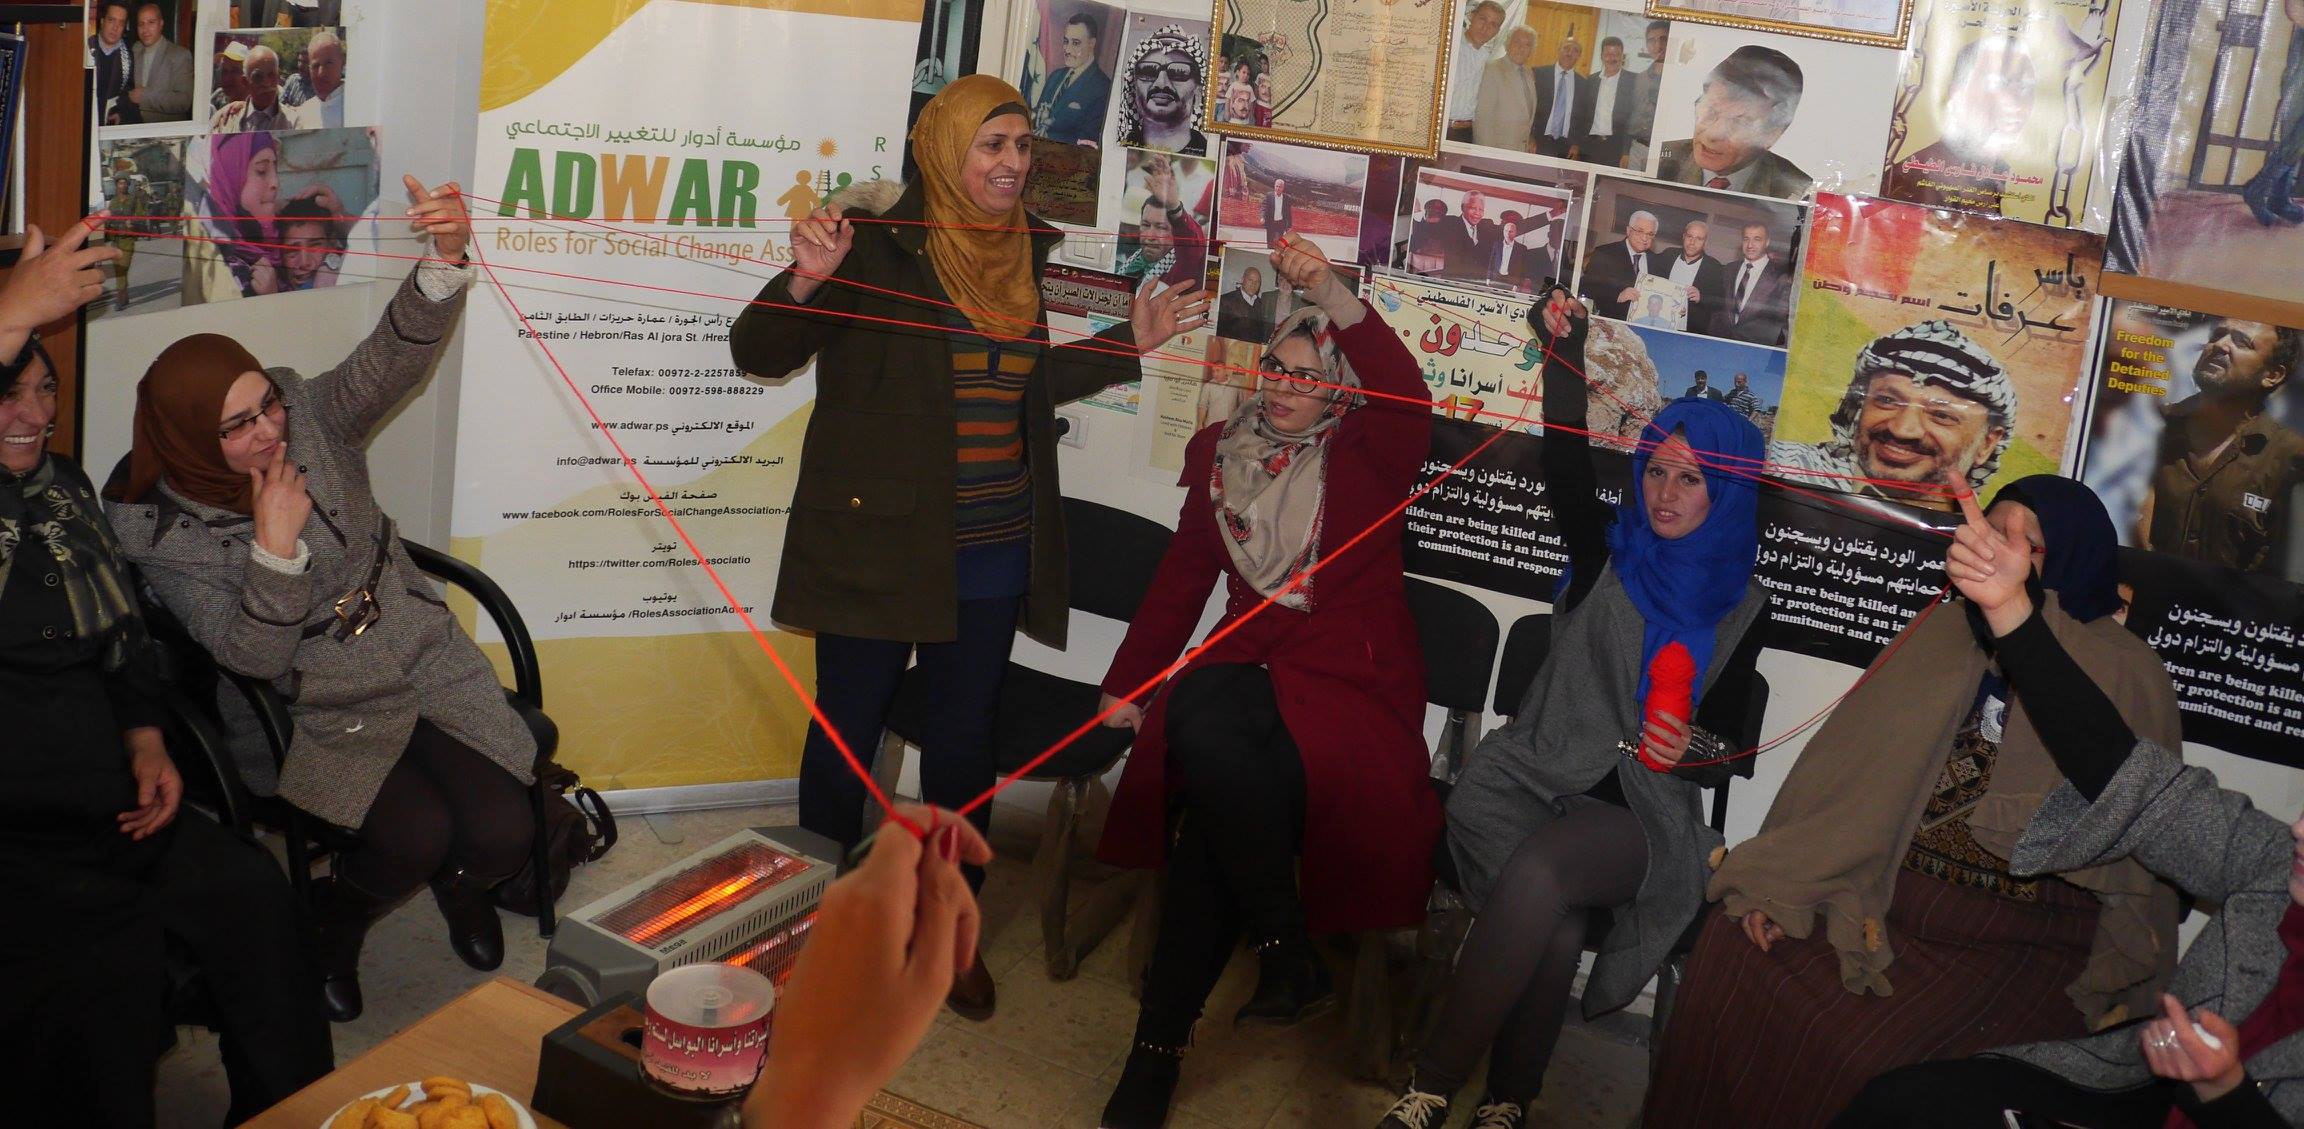  ADWAR Association with the Palestinian Prisoners club  implemented meeting for women prisoners in Hebron